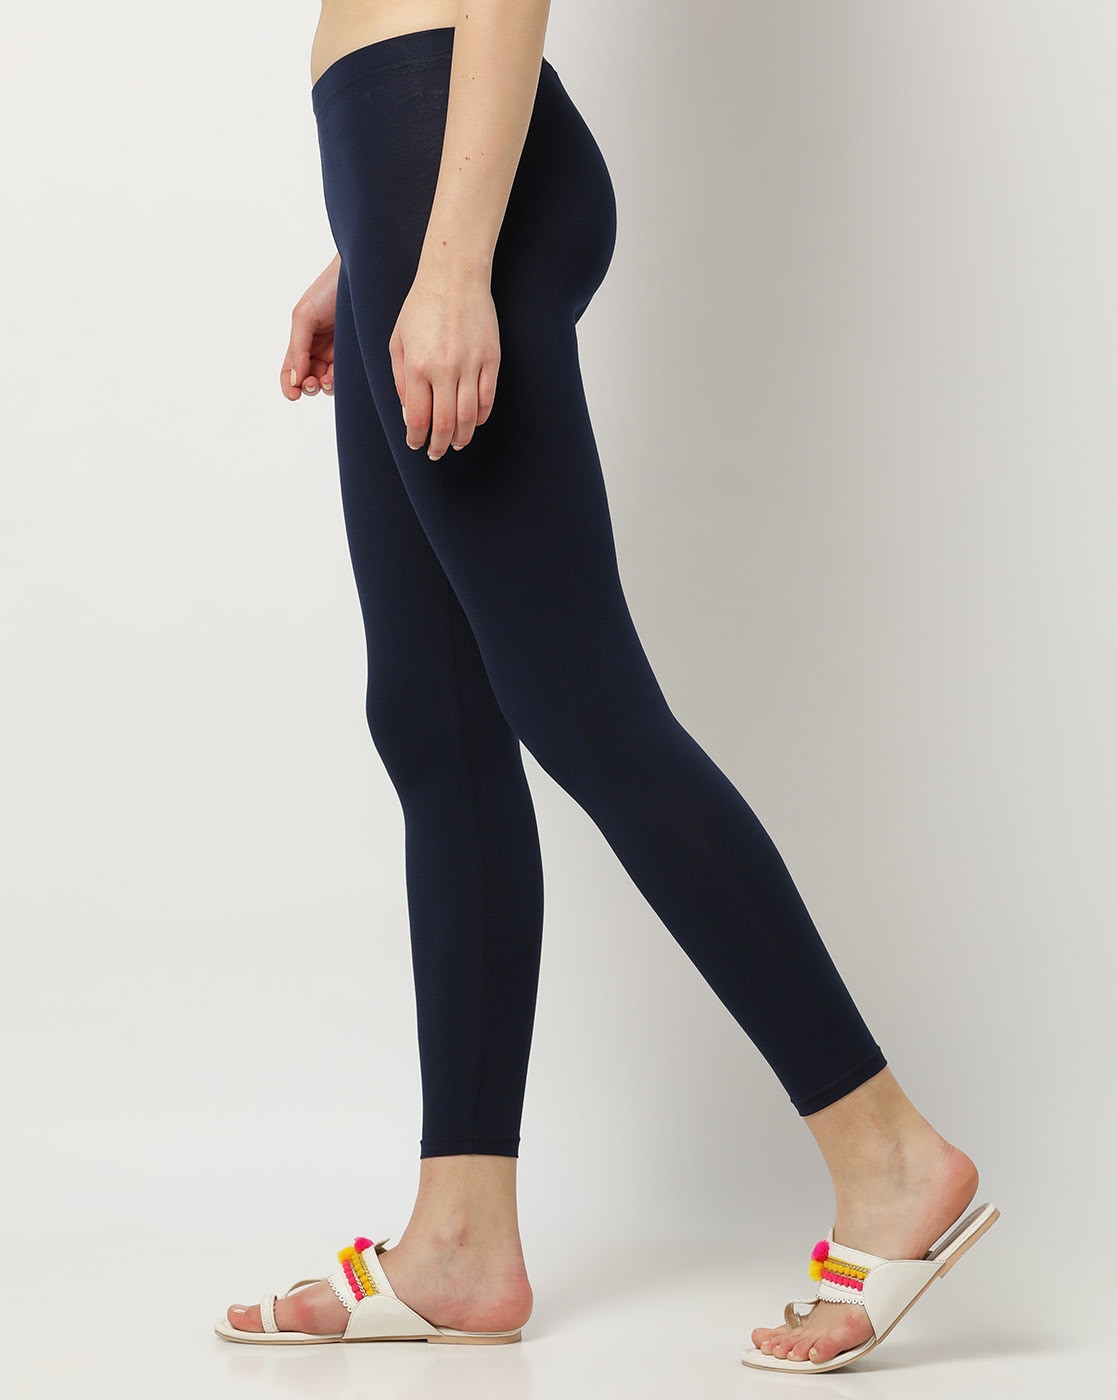 Alcis Women Secure Fit Cropped Training Tights (Navy Blue, M) -  ECWLGSS2100811 Price - Buy Online at Best Price in India